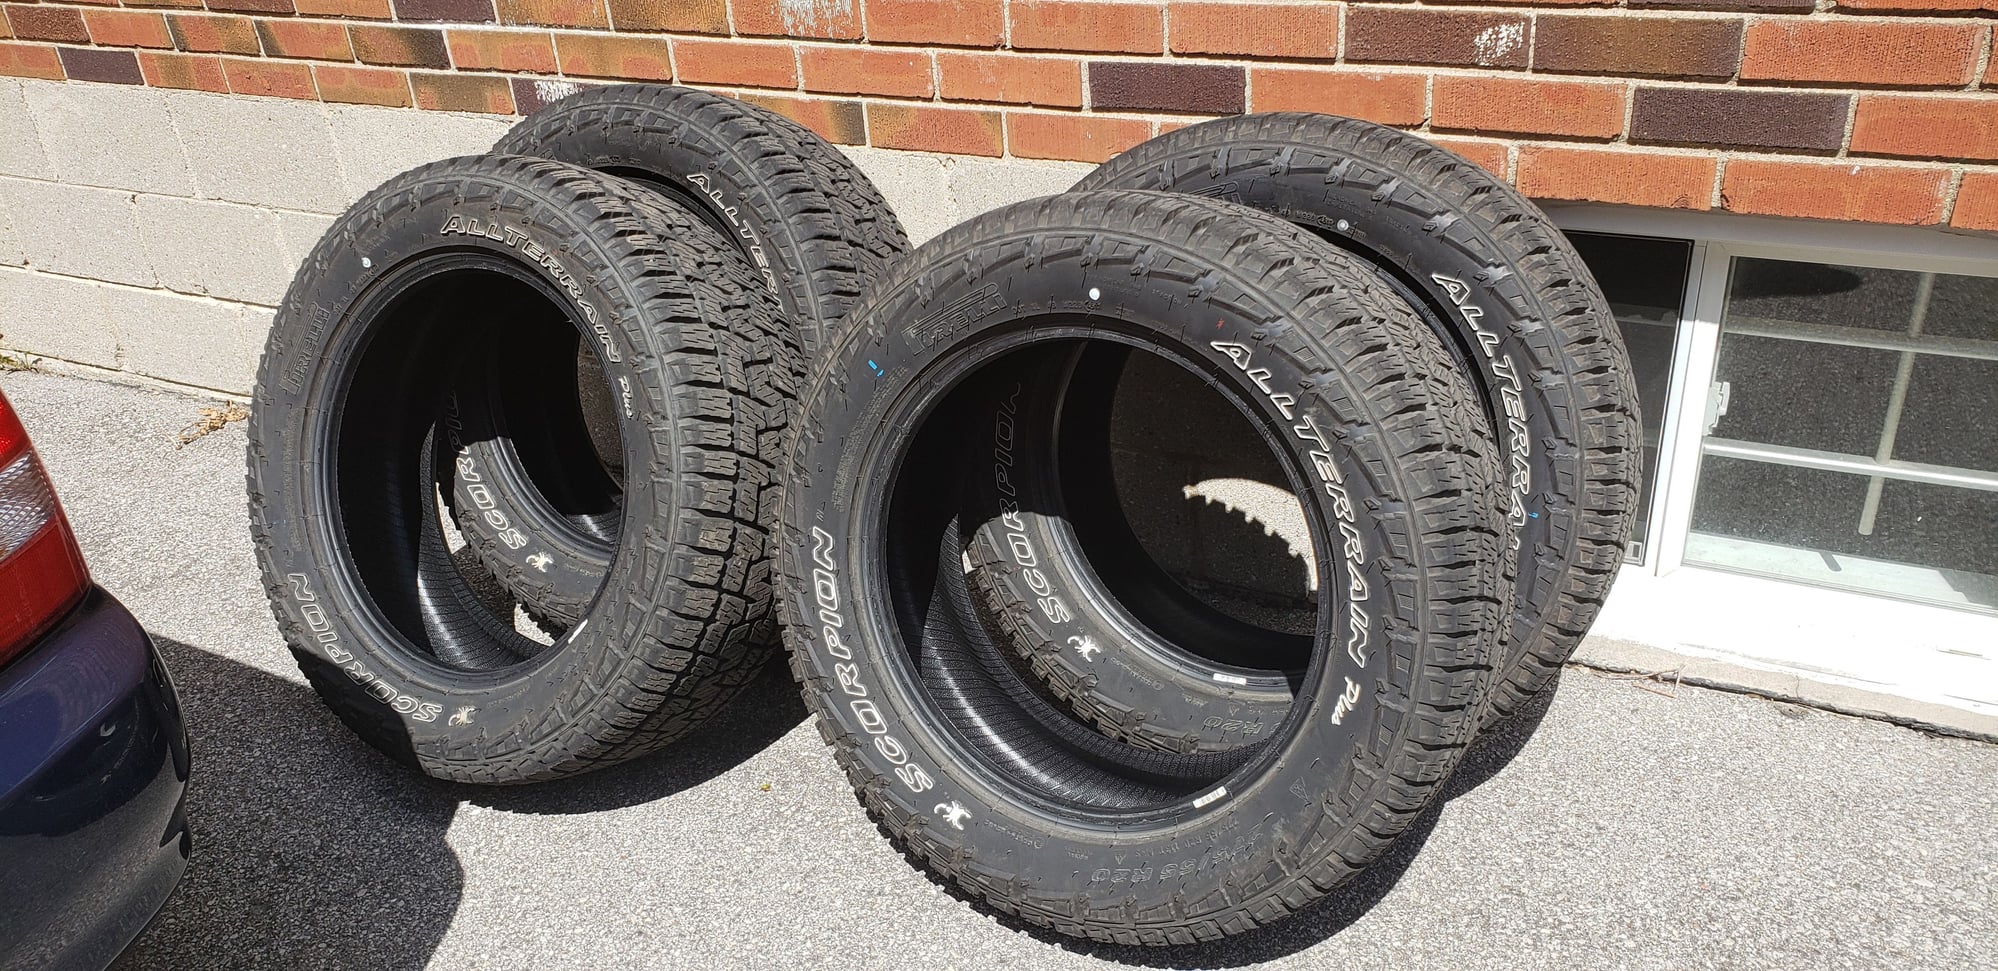 5 Truck - replacement tires? Community F150 - - Page Forum Fans of Good Ford Ford